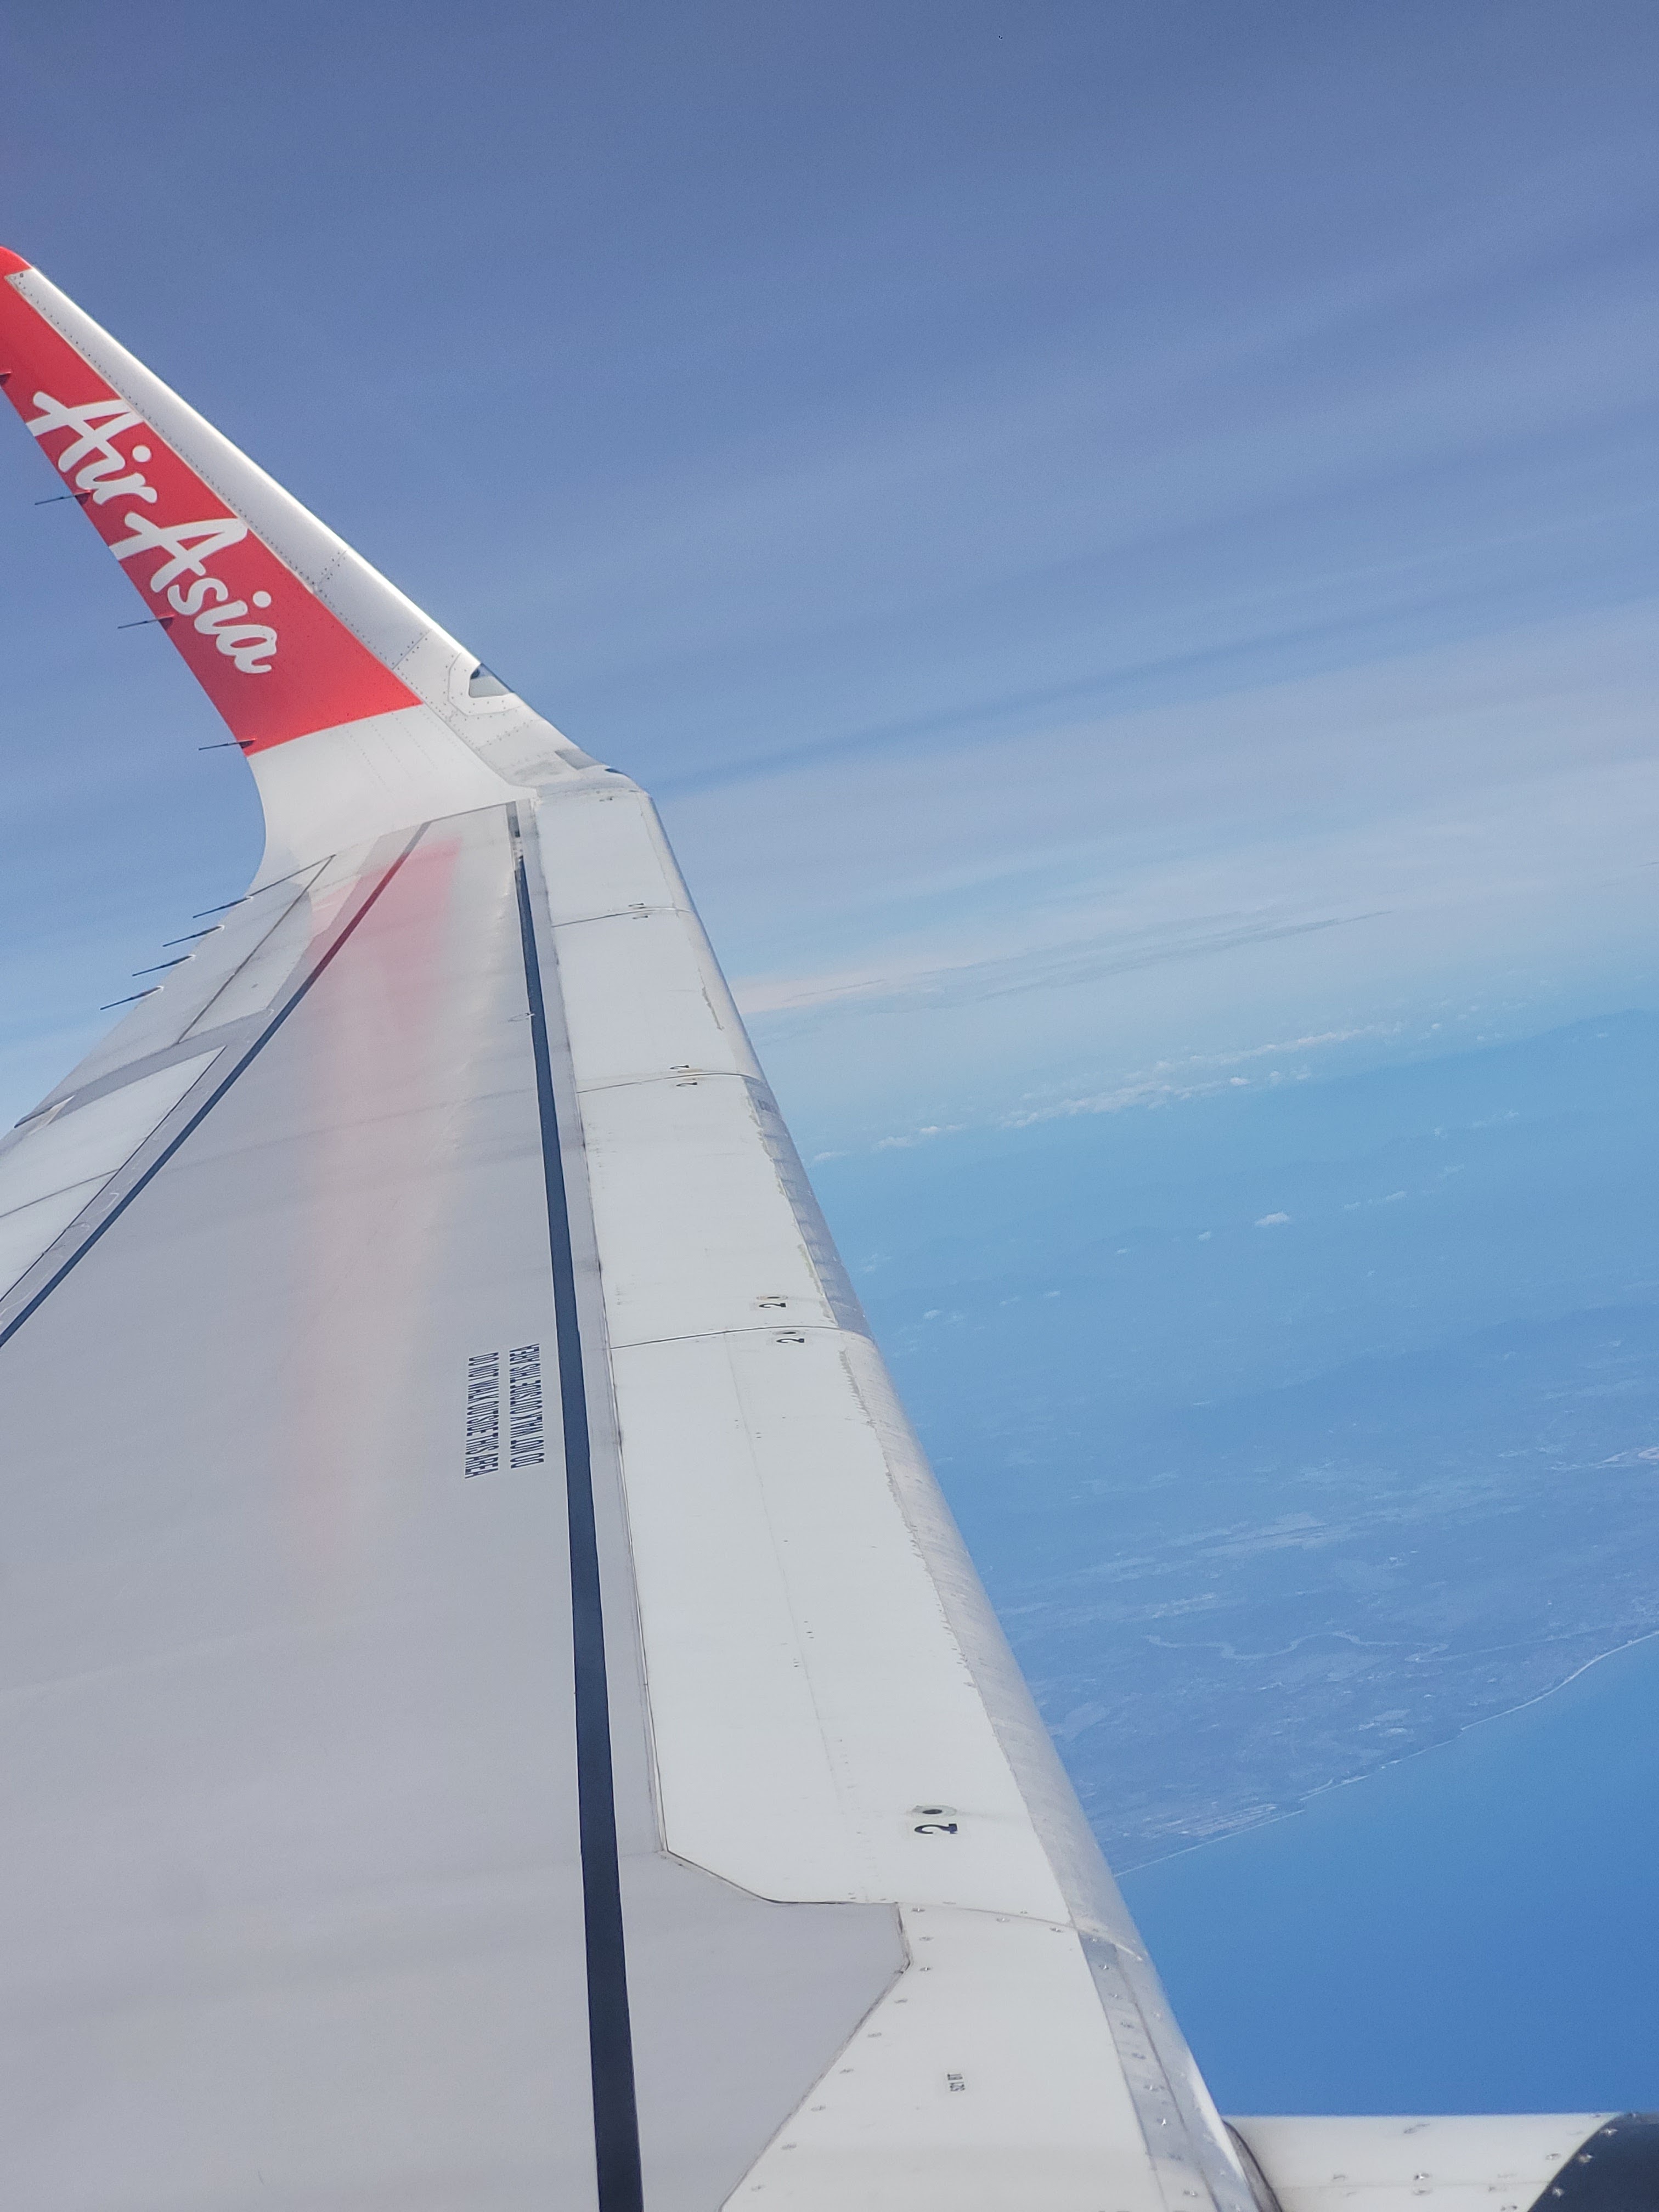 Flying AirAsia to South East Asia